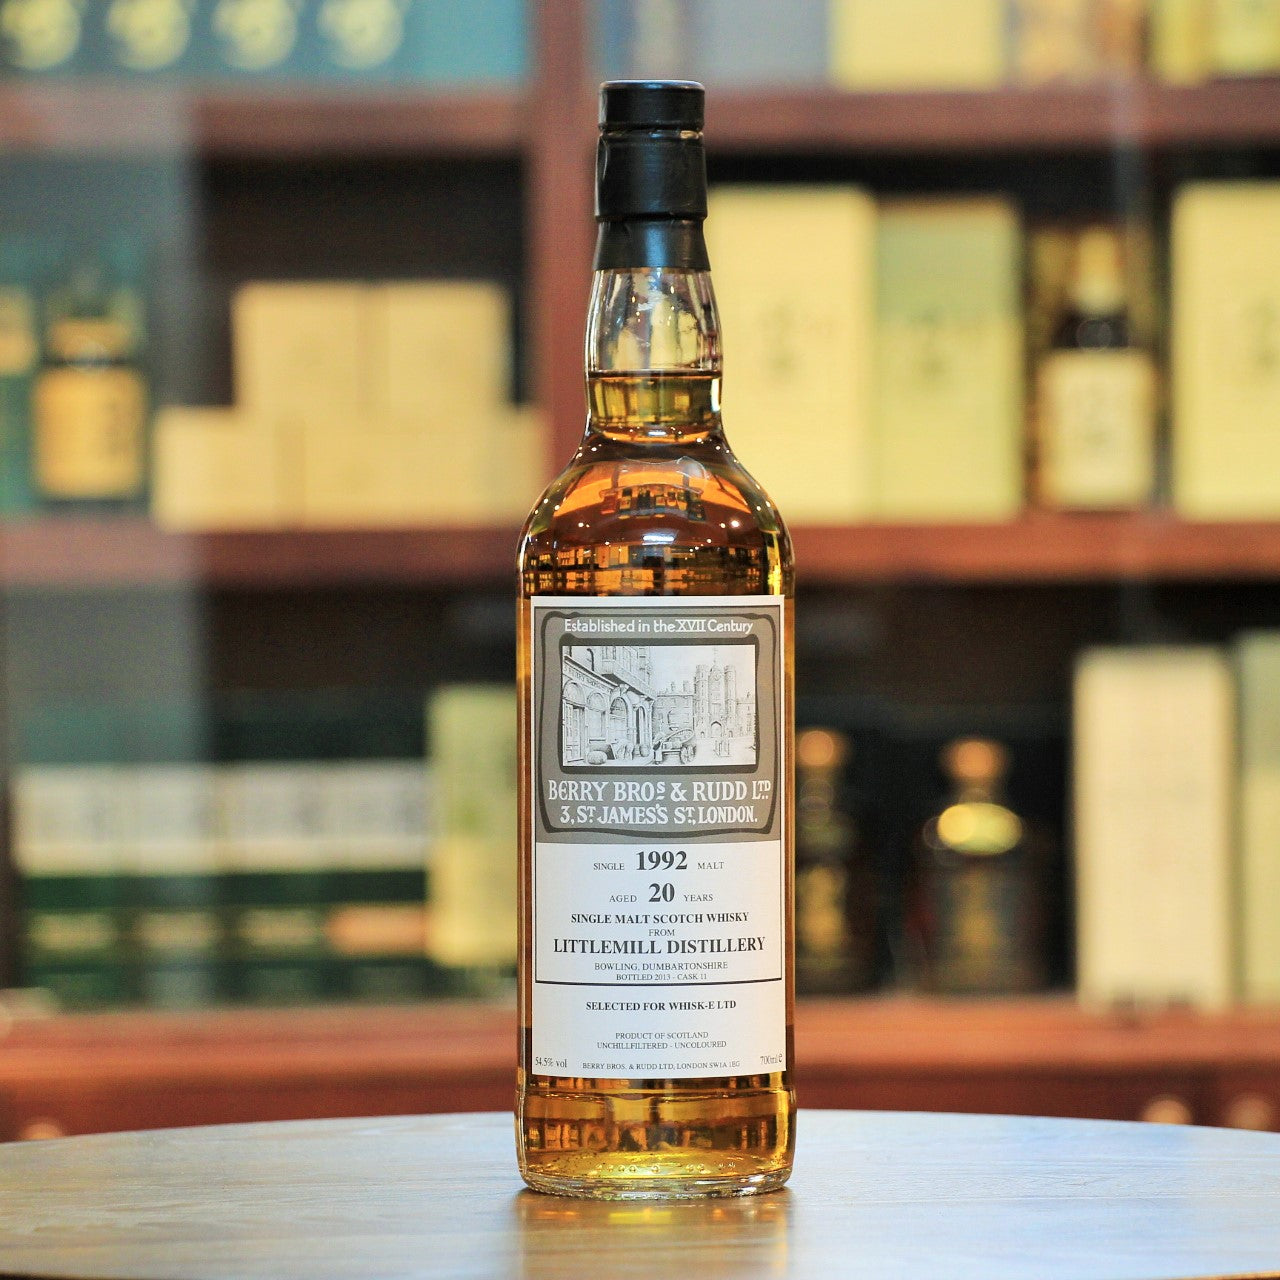 Littlemill 1992 20 Years Old Berry Bros & Rudd Bottling for Whisk-E, A 1992 vintage malt from the closed distillery Littlemill, which closed in the 1990s. This whisky was matured in Cask #11 and bottled in 2013 at an impressive ABV of 54.5%.